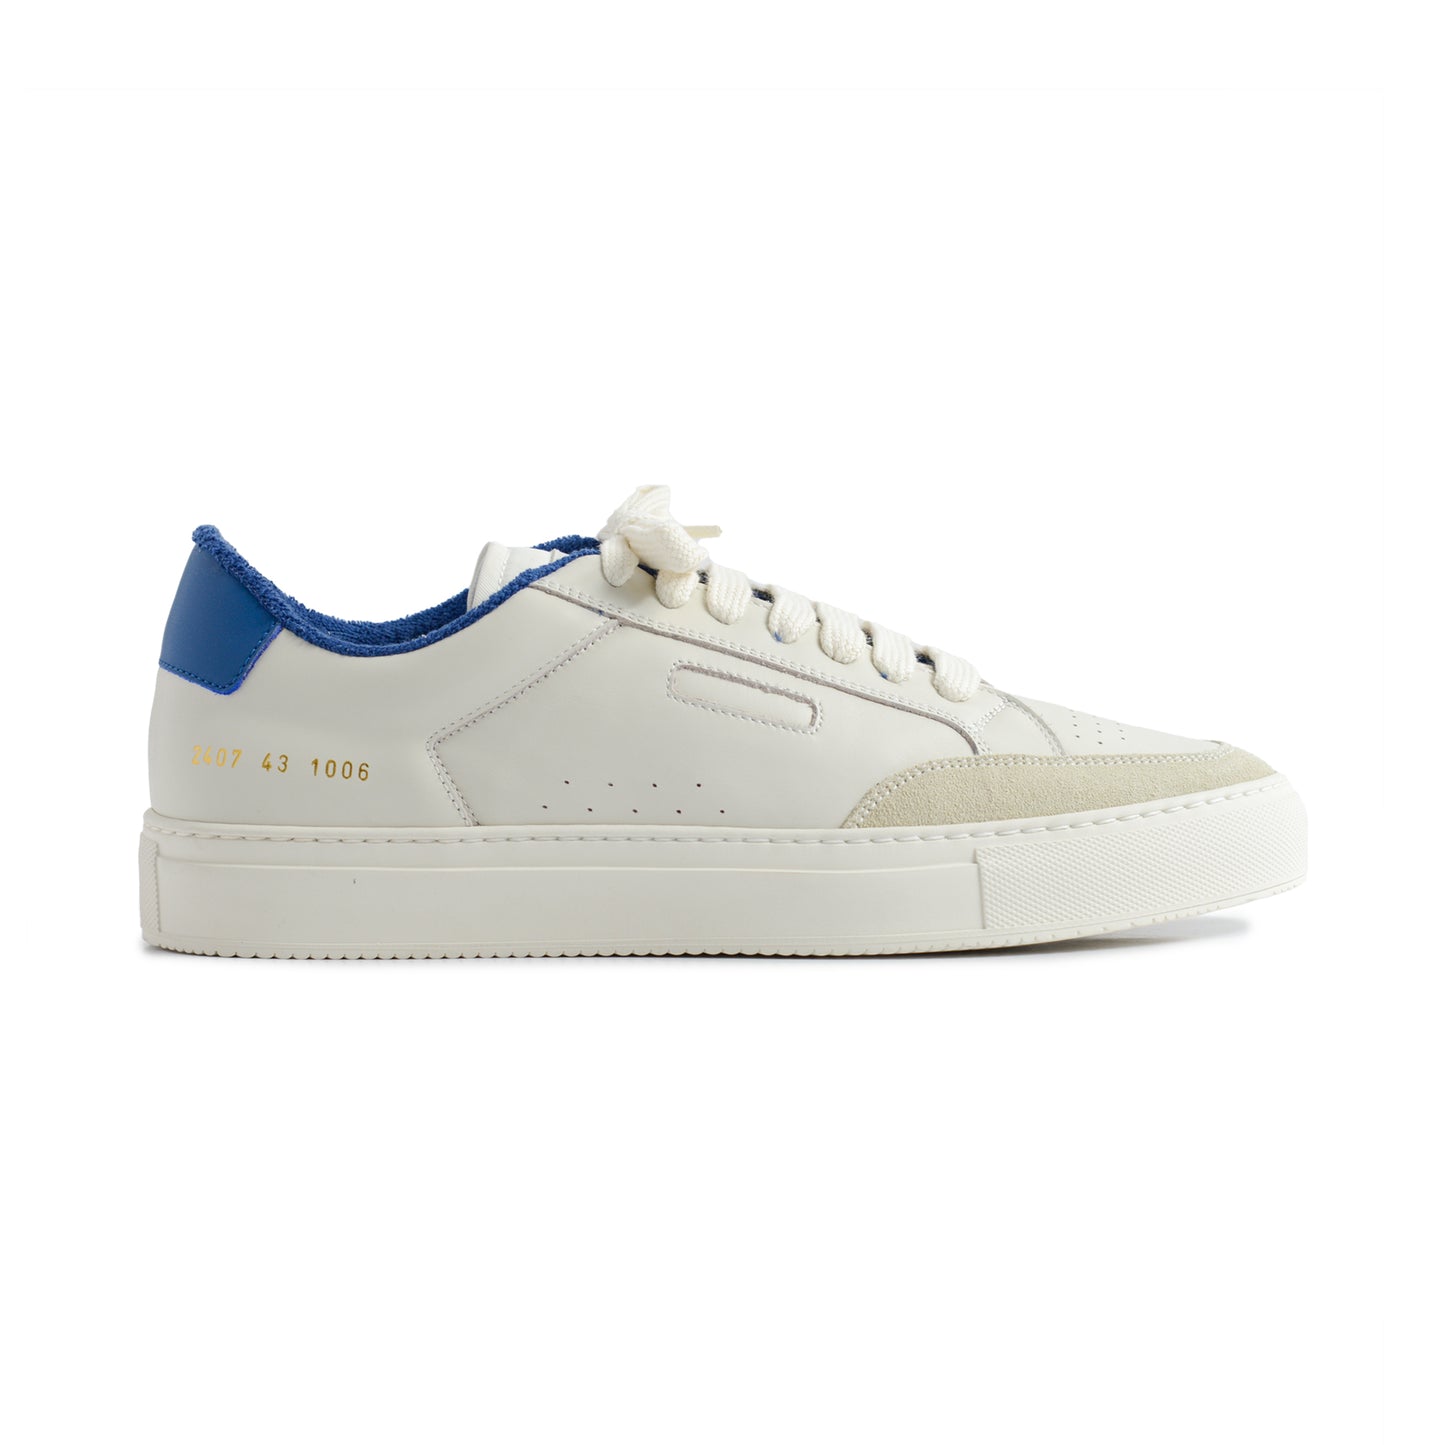 Common Projects Tennis Pro Sneakers